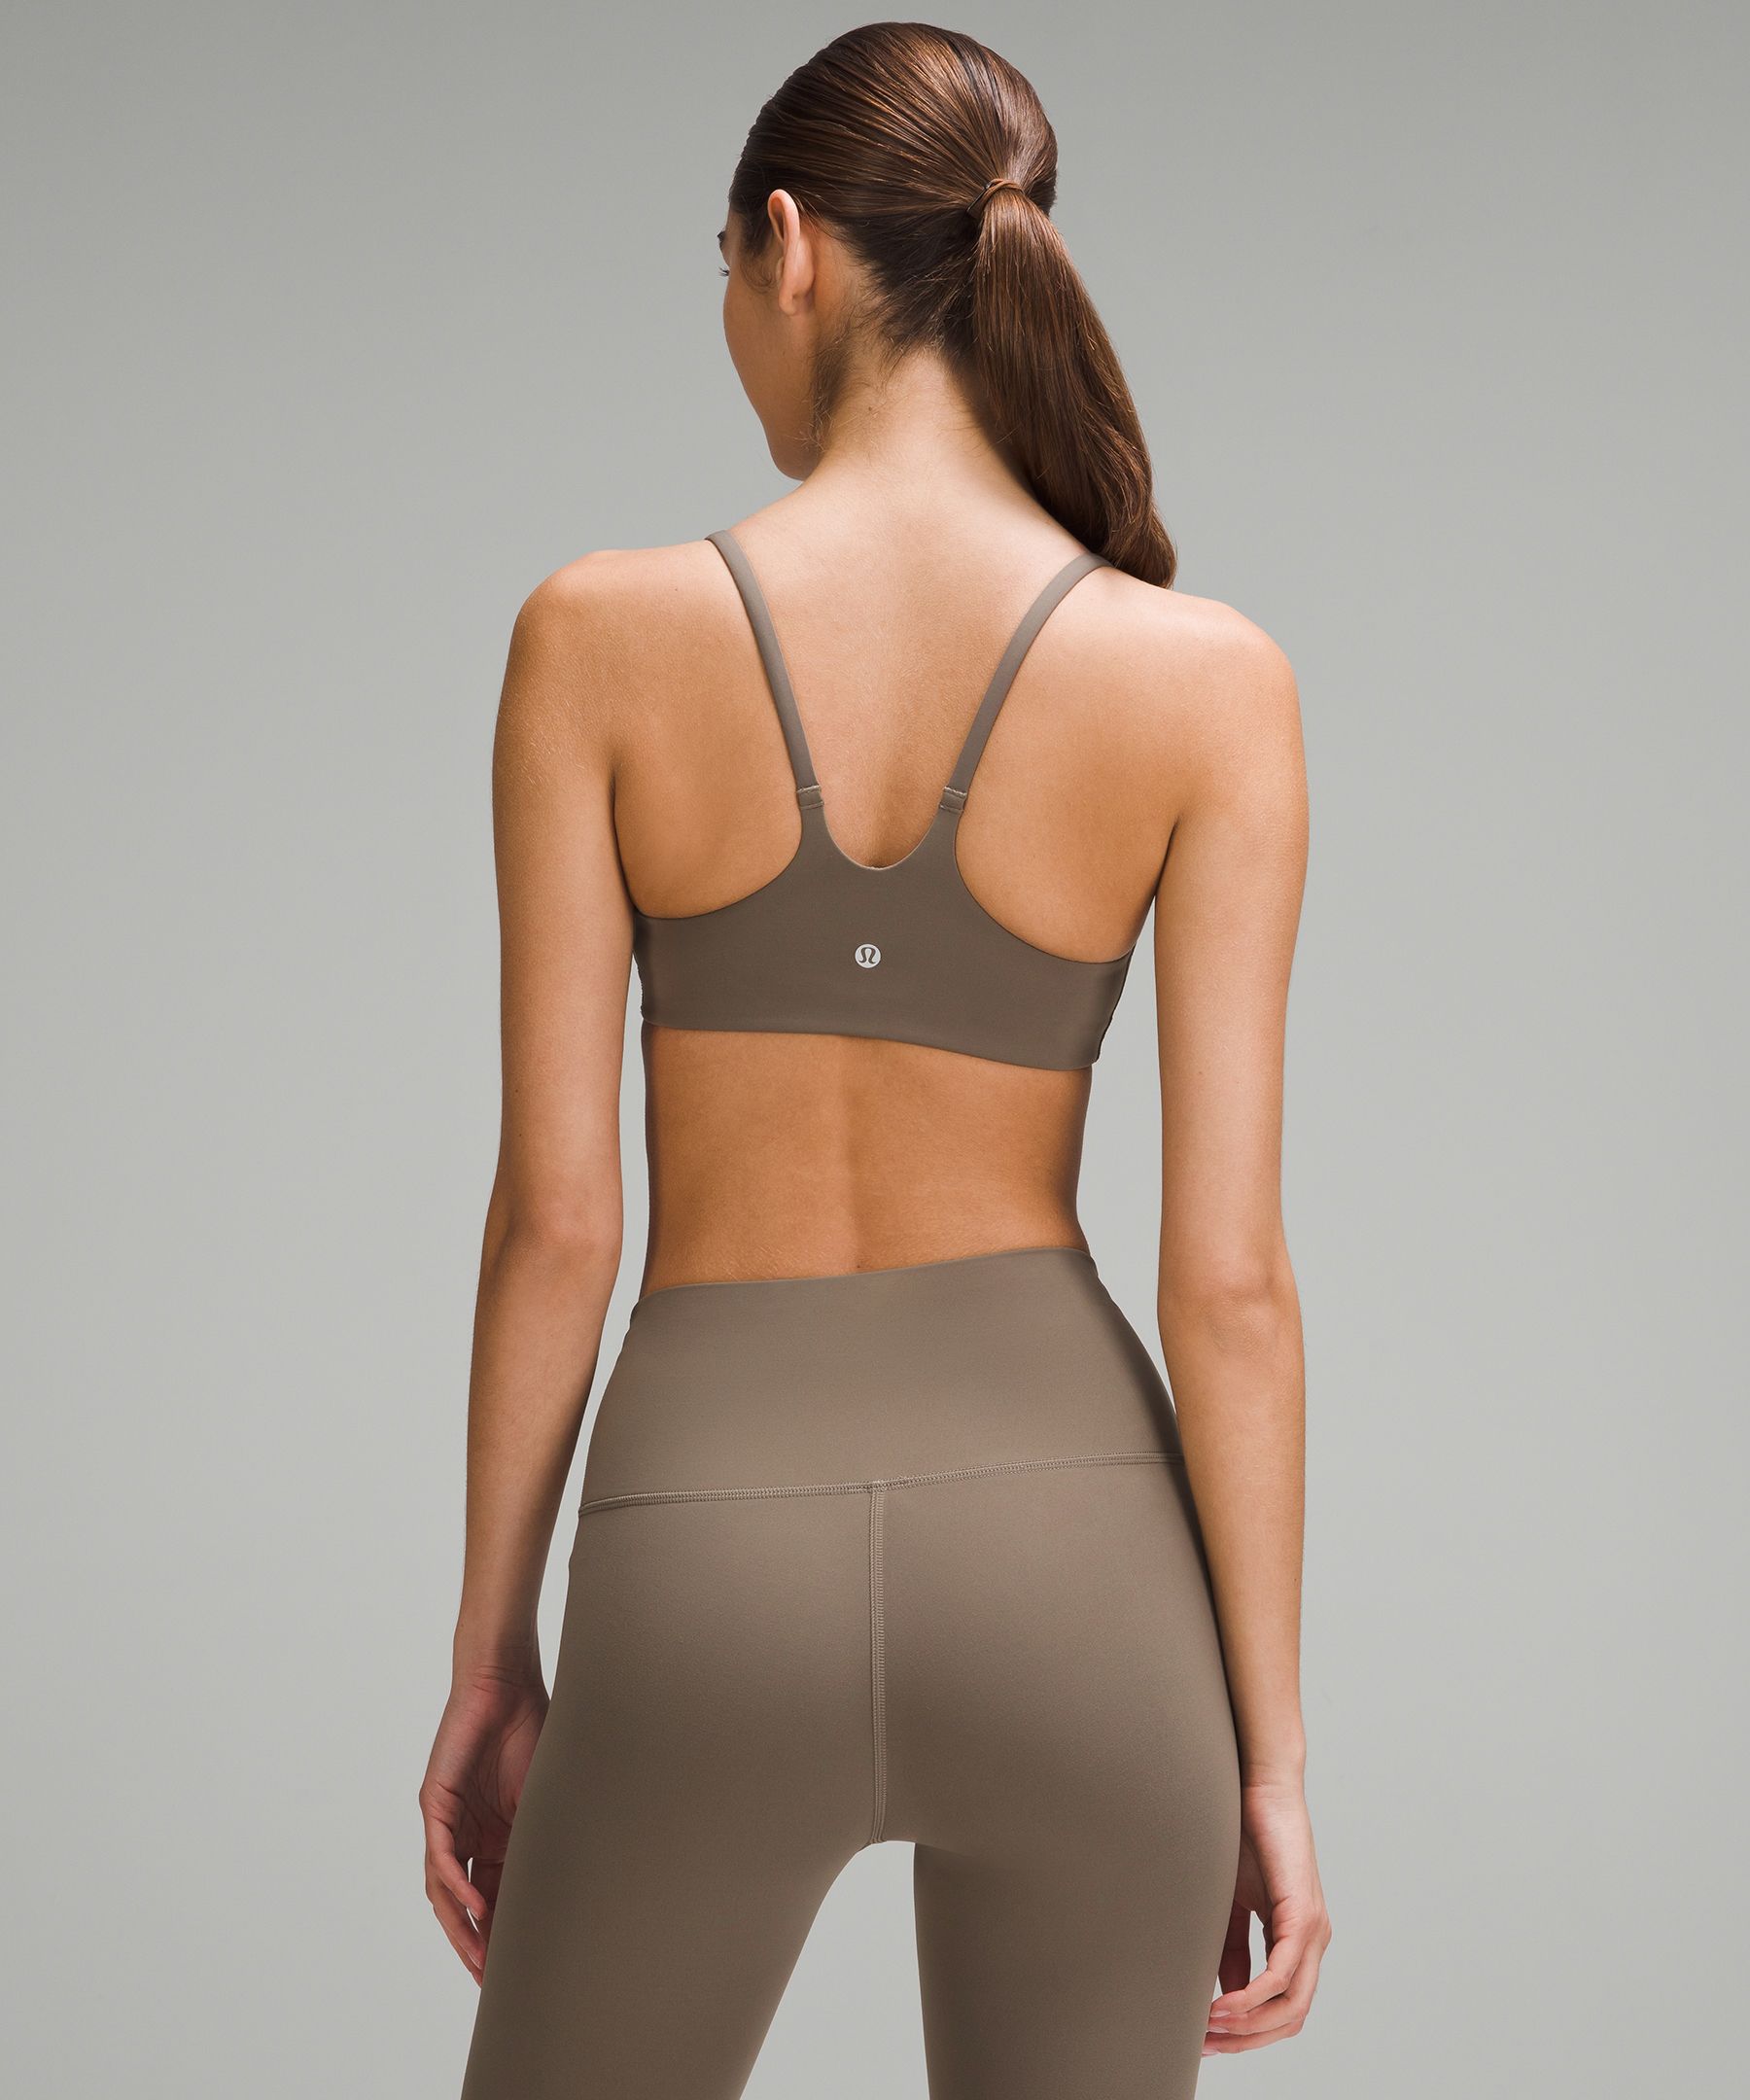 Womens Padded Sports Bra And Leggings And Leggings Set For Yoga, Running,  Jogging, And Fitness Workouts From Capsicum, $35.52